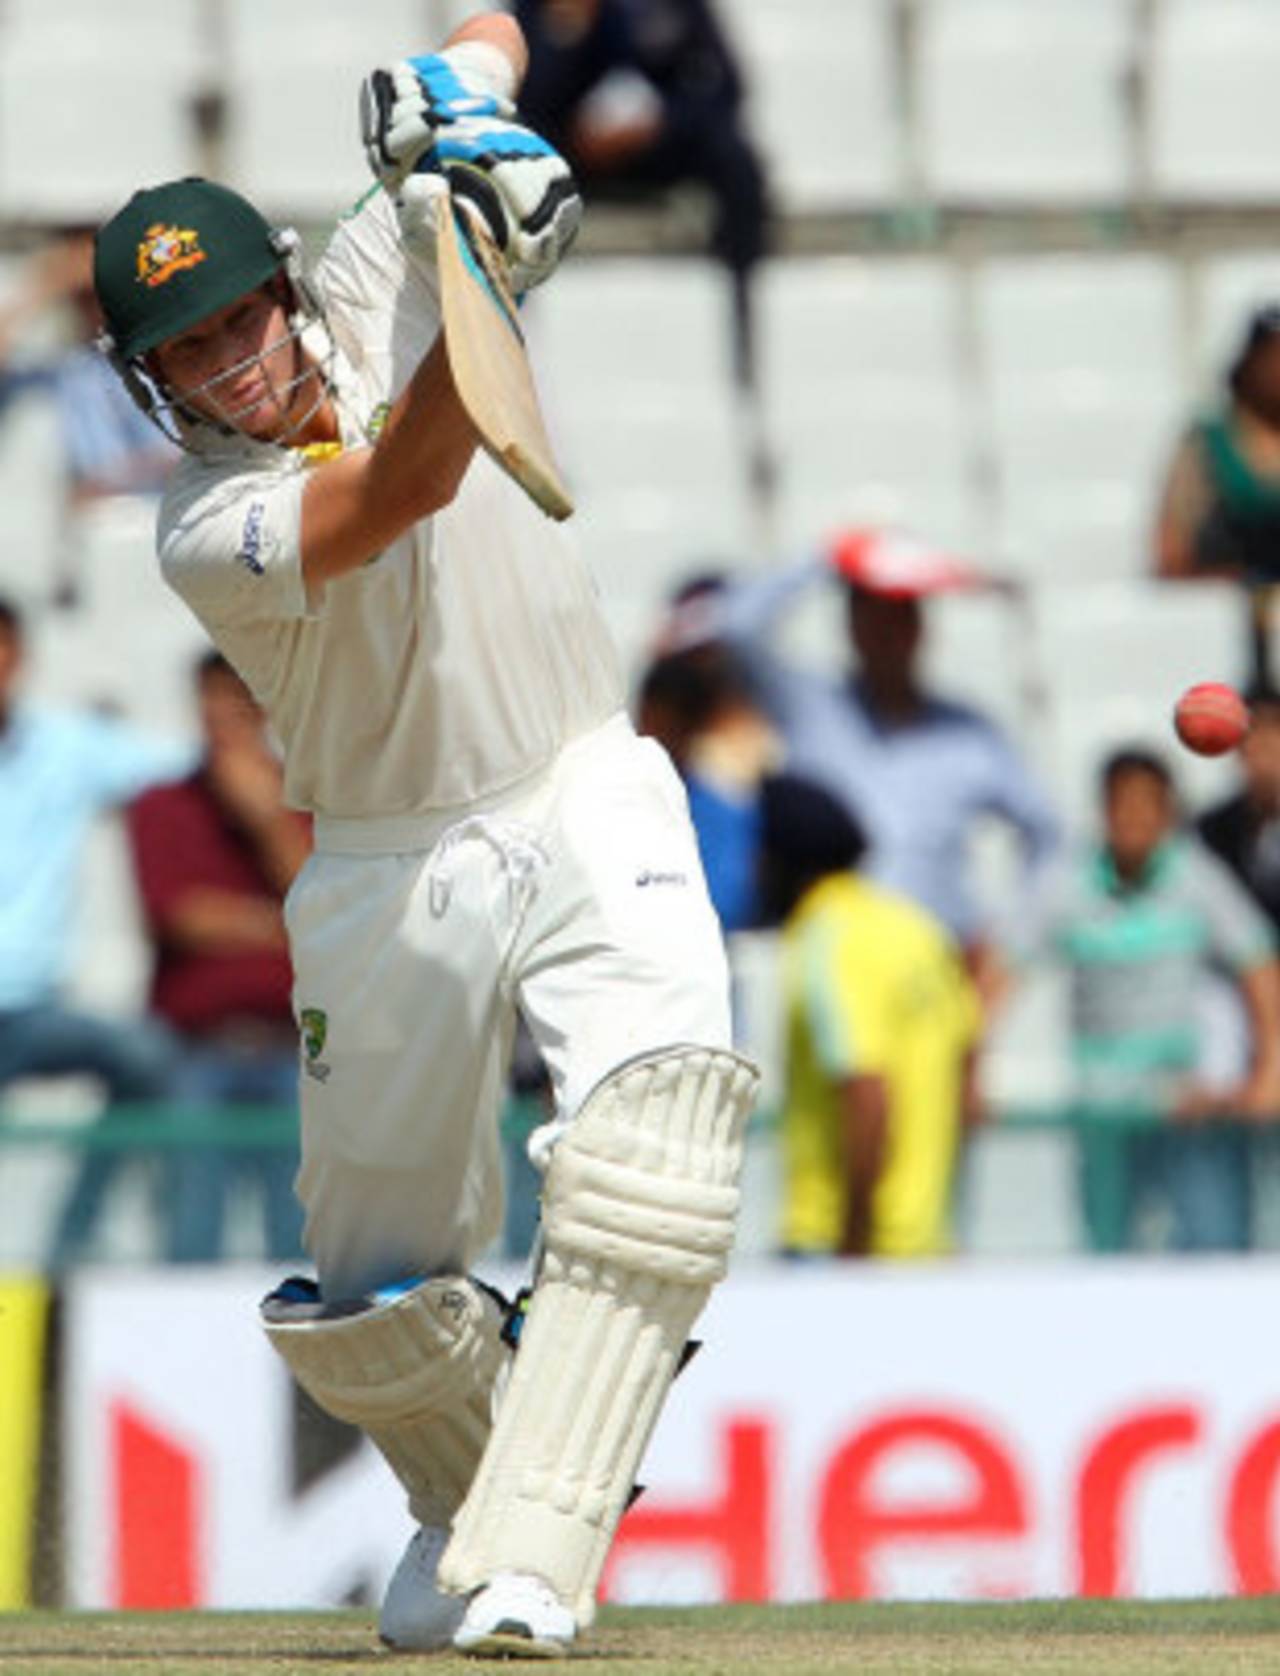 Steve Smith hits down the ground, India v Australia, 3rd Test, Mohali, 2nd day, March 15, 2013